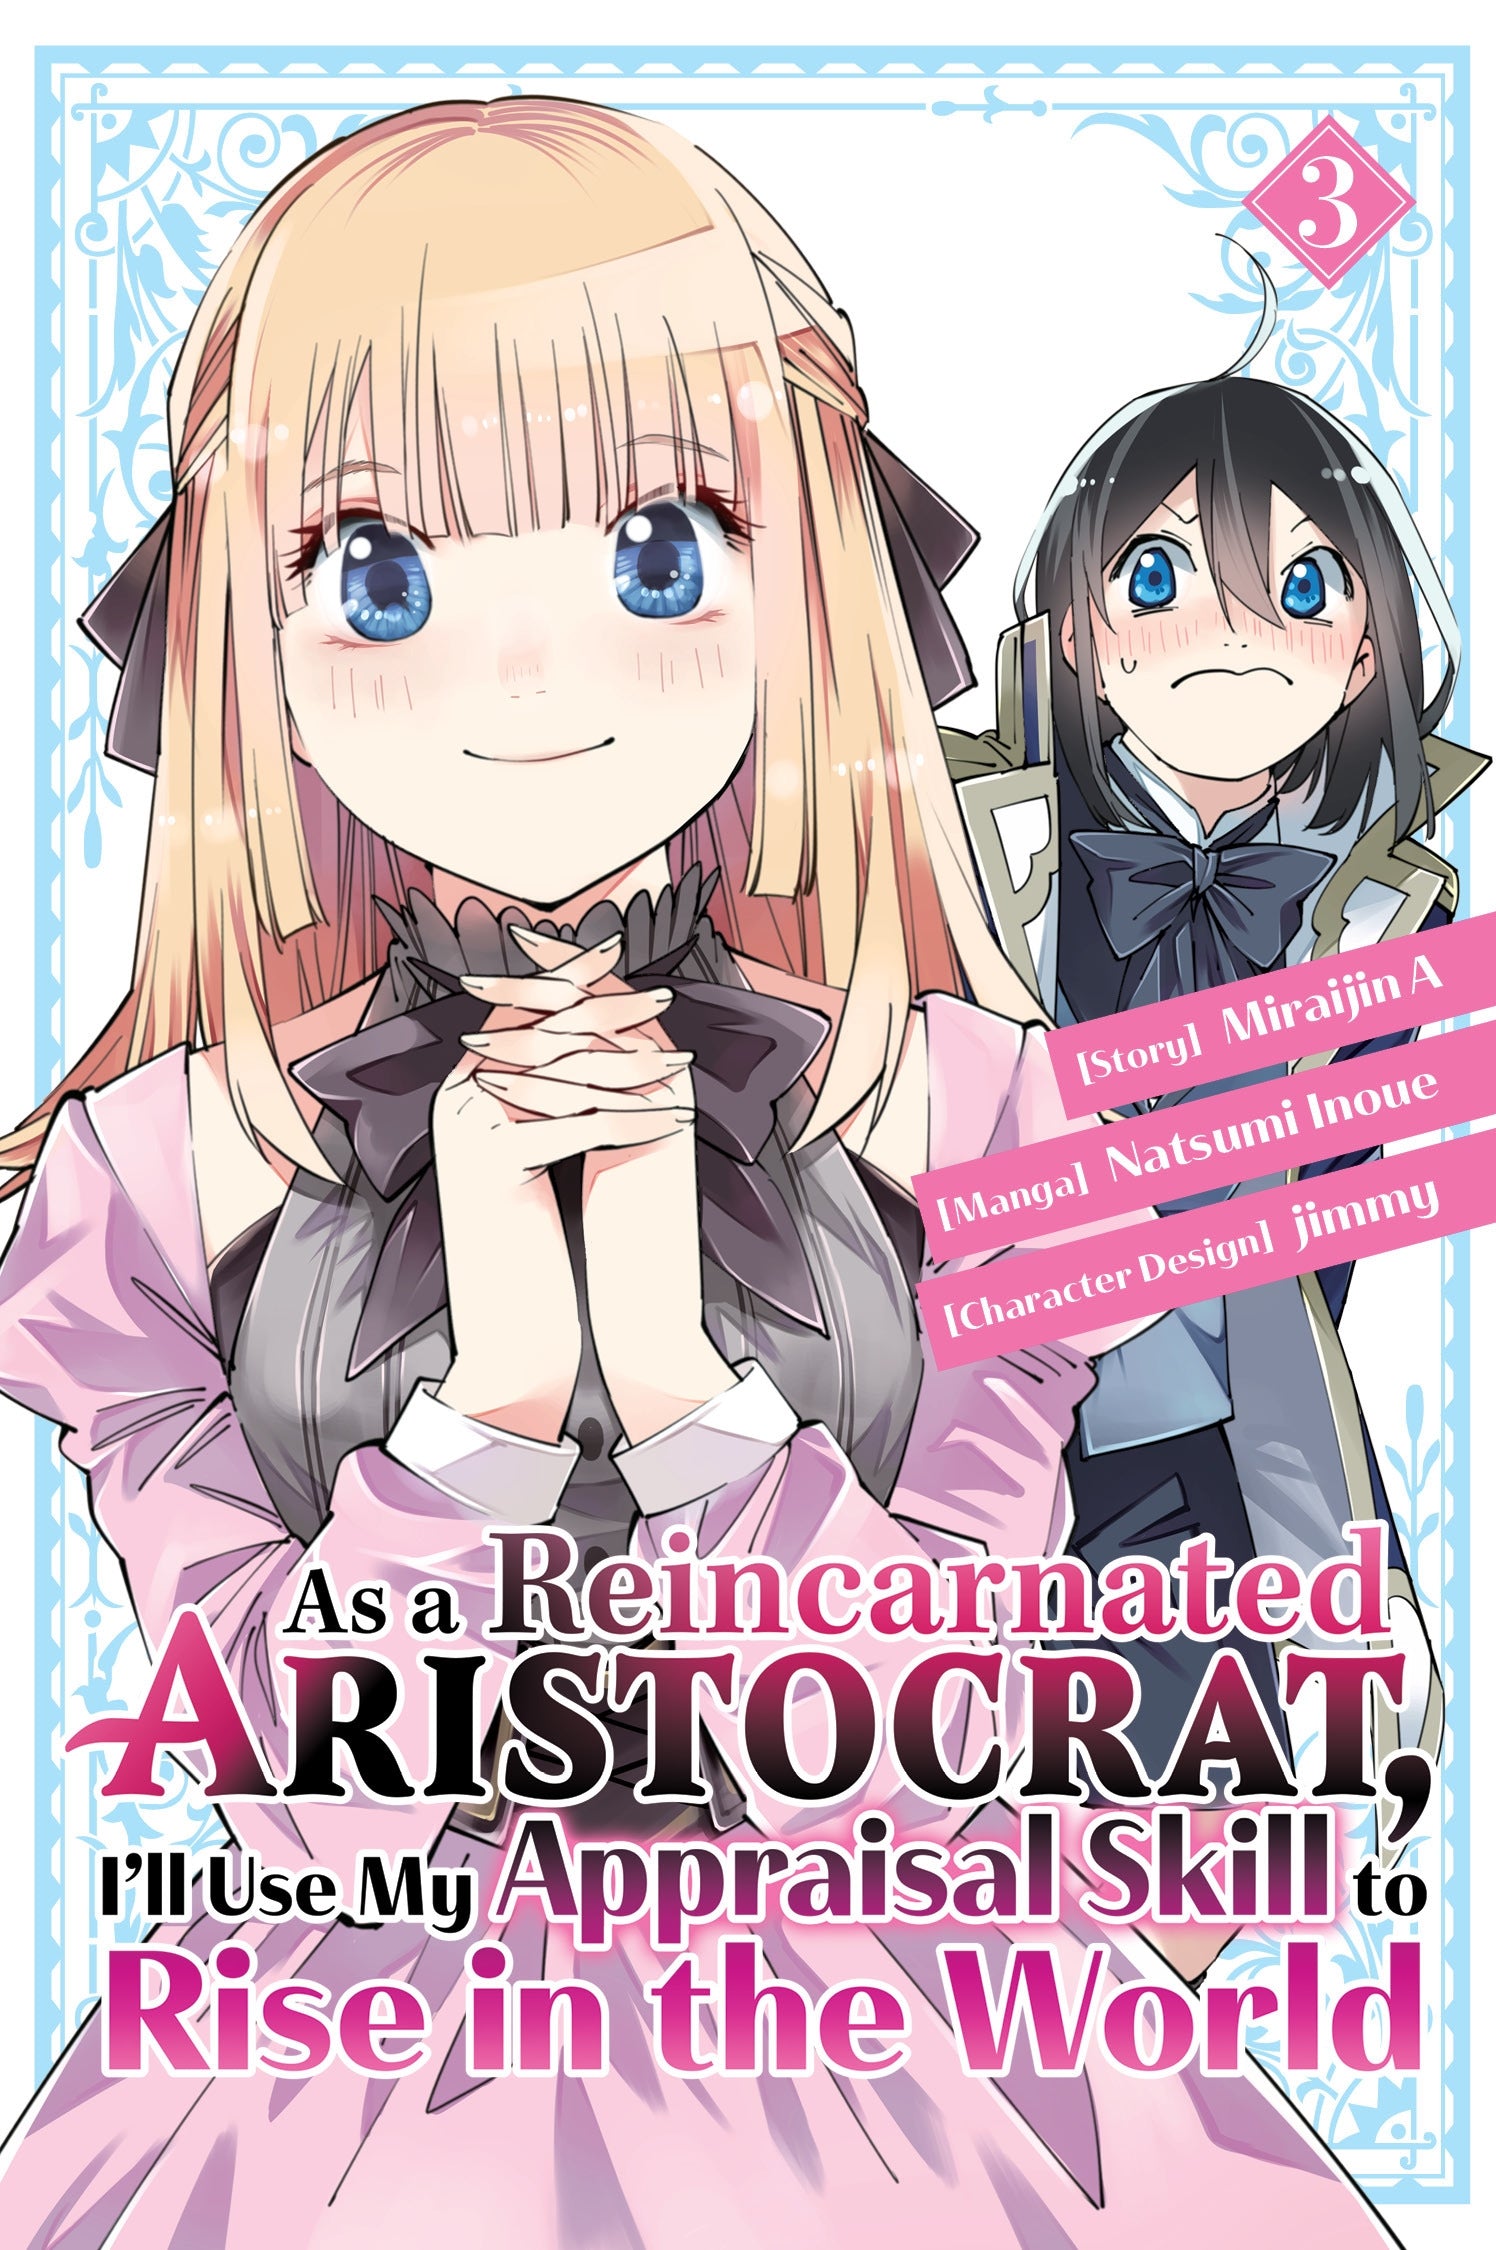 As a Reincarnated Aristocrat, I'll Use My Appraisal Skill to Rise in the World - Vol. 3 (Manga)